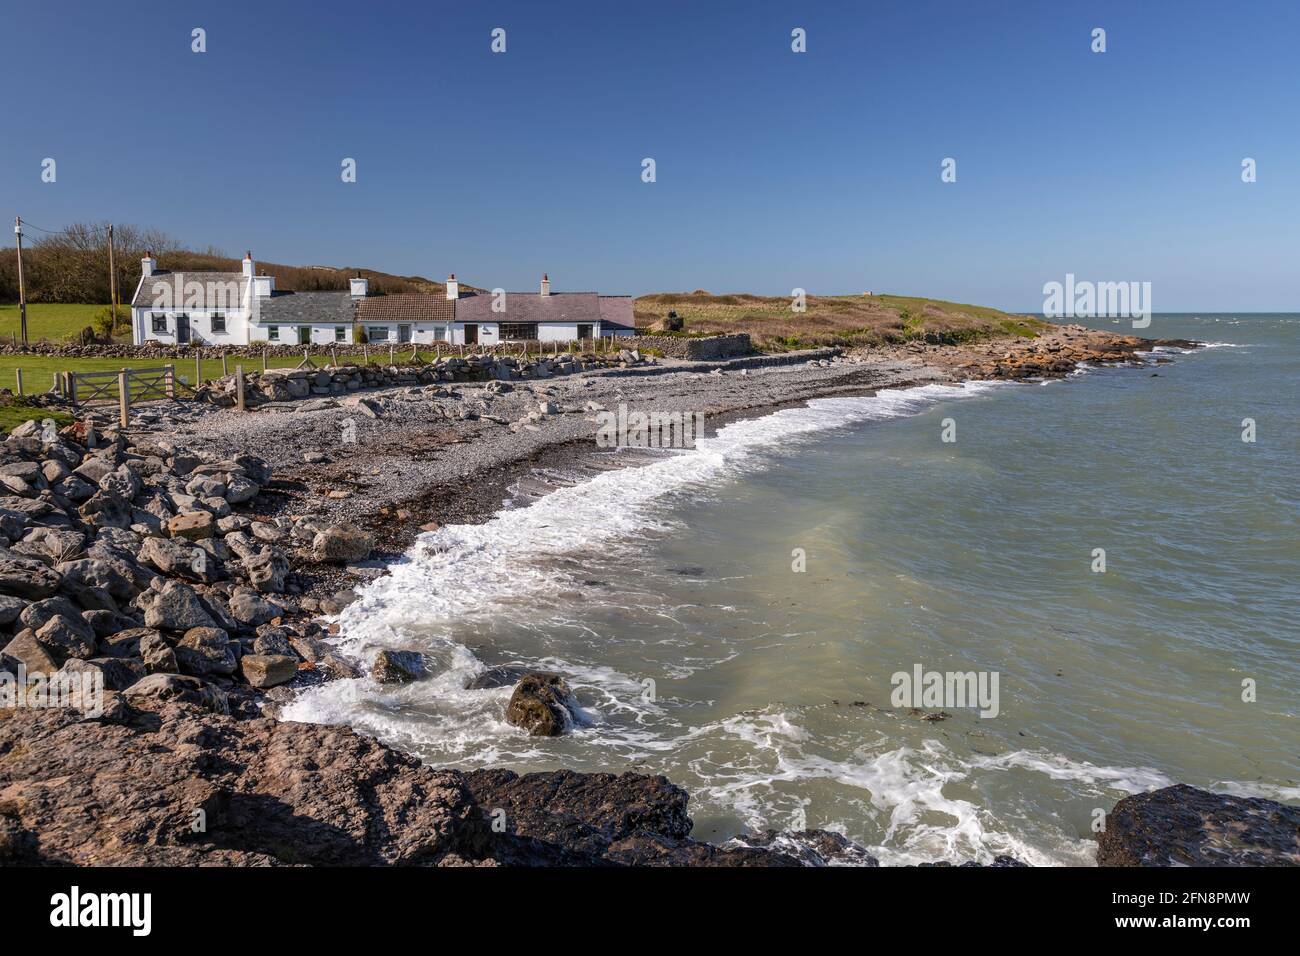 Spiaggia e case, Moelfre, Anglesey, Galles del Nord Foto Stock